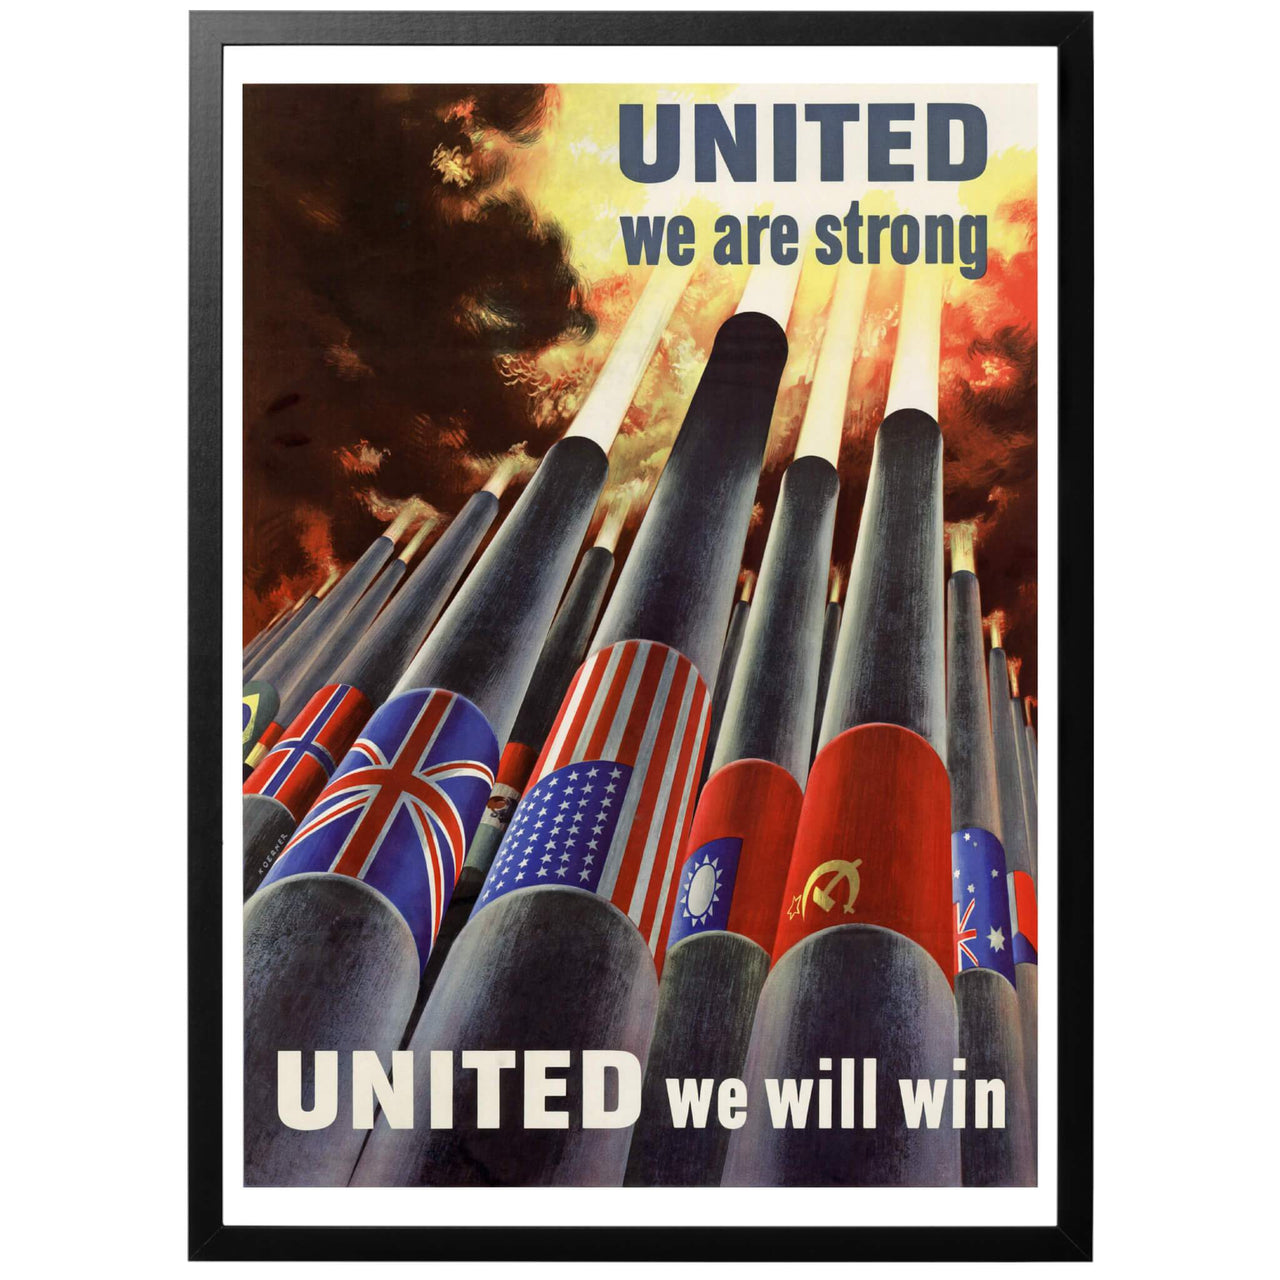 United we are strong! Poster